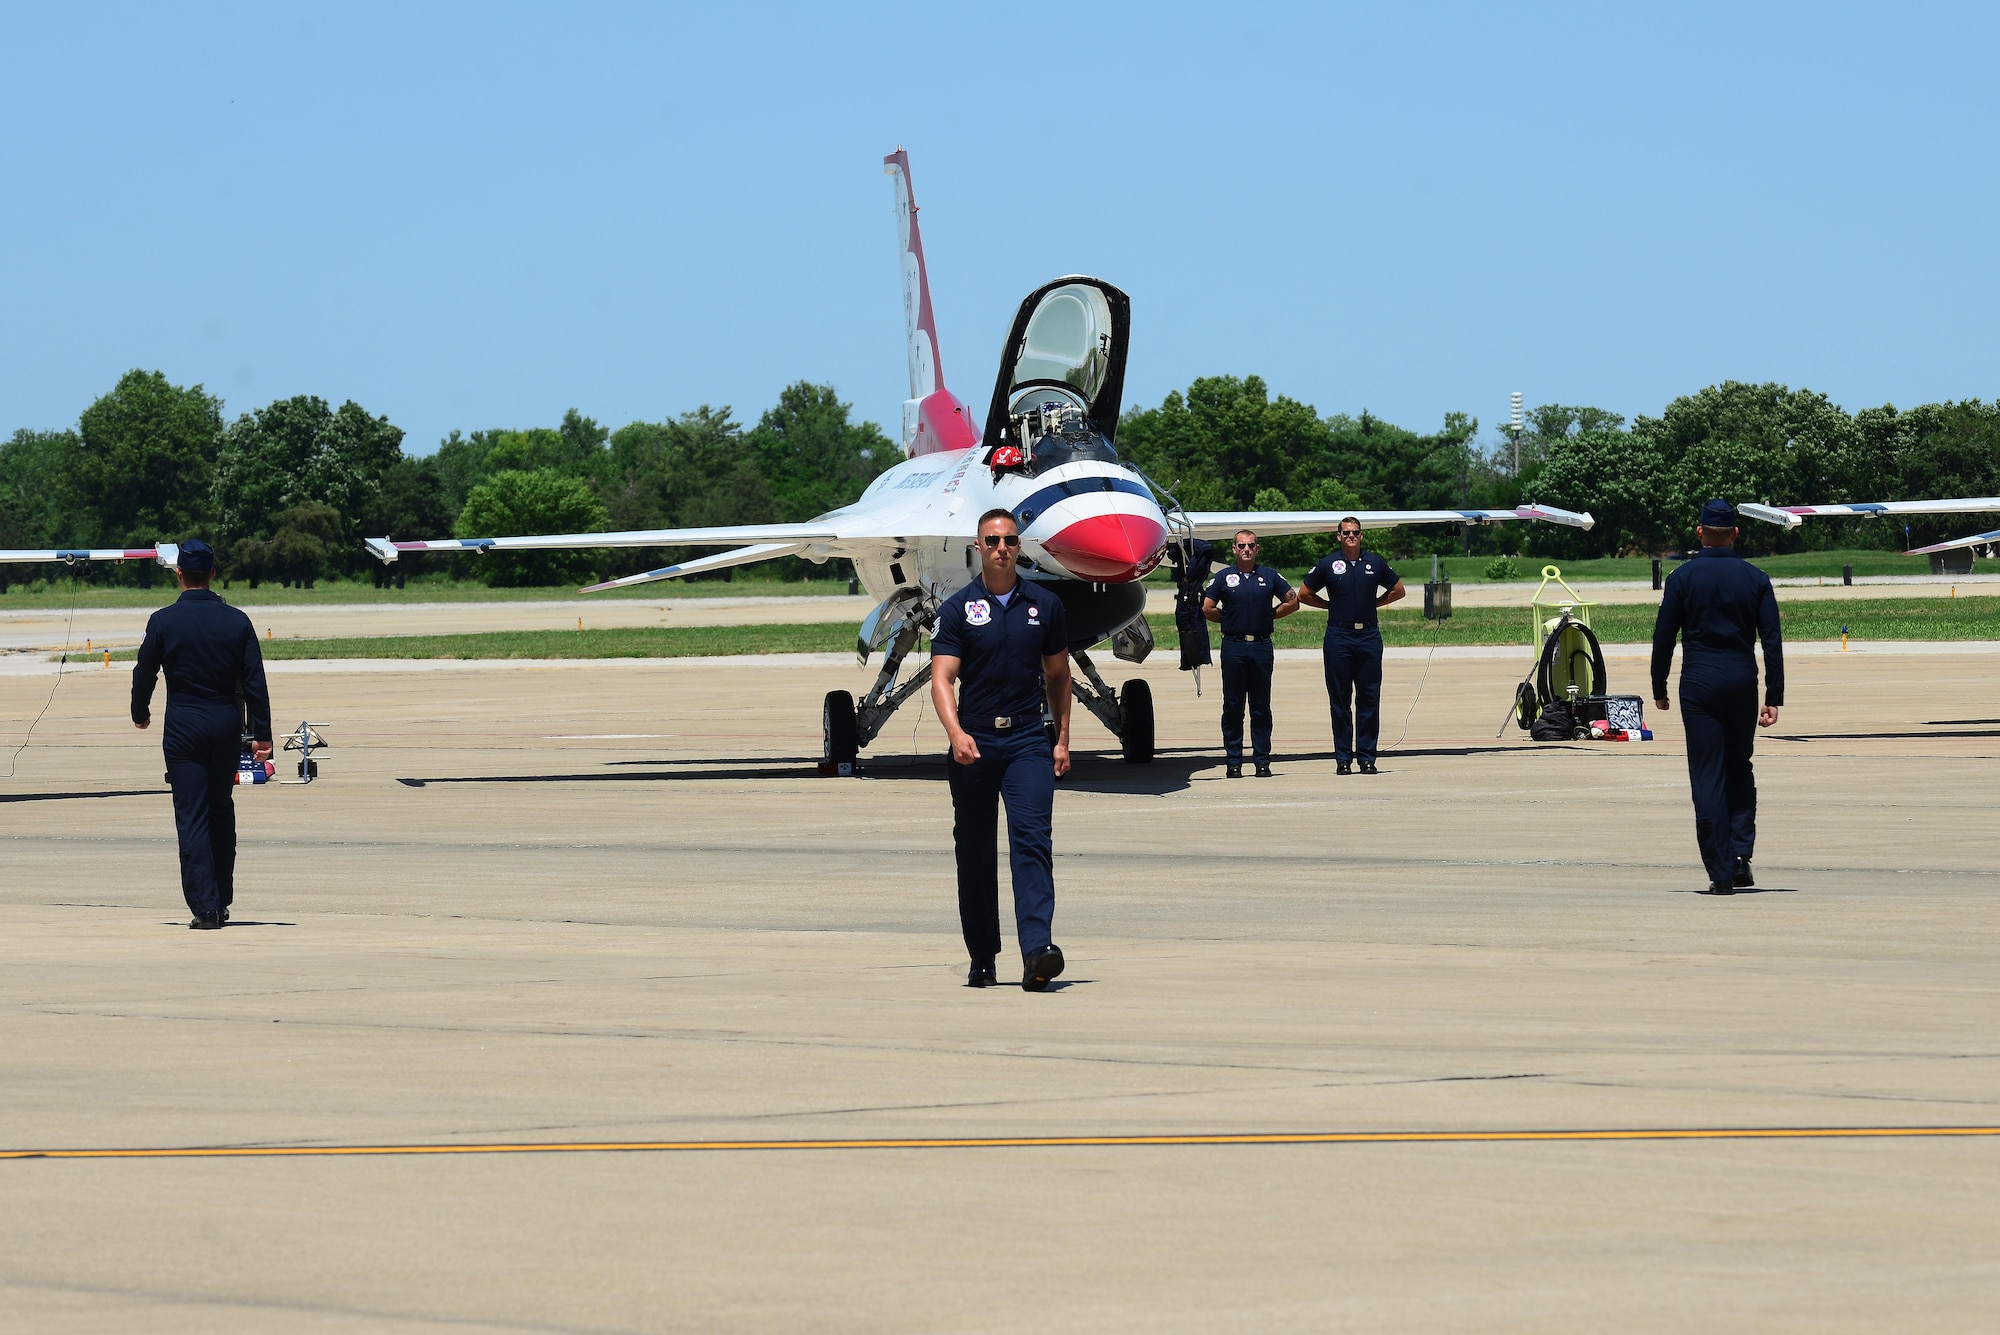 Thunderbird members perform a pre-show ground demonstration at Scott Air Force Base, Ill., June 9, 2017. The Thunderbirds, officially known as the U.S. Air Force Air Demonstration Squadron, performs precision aerial maneuvers to demonstrate the capabilities the F-16 Fighter Falcon, the Air Force’s premier multi-role fighter jet, Scott Air Force Base, Ill., June 9, 2017.   Eight highly experienced fighter pilots, four support officers, three civilians, and over 120 enlisted personnel help make it possible for the team to showcase the capabilities of this fighter jet to millions of people each year.  Together, this team has ensured that a demonstration has never been cancelled due to maintenance difficulty.  (U.S. Air Force photo by Tech. Sgt. Maria Castle)